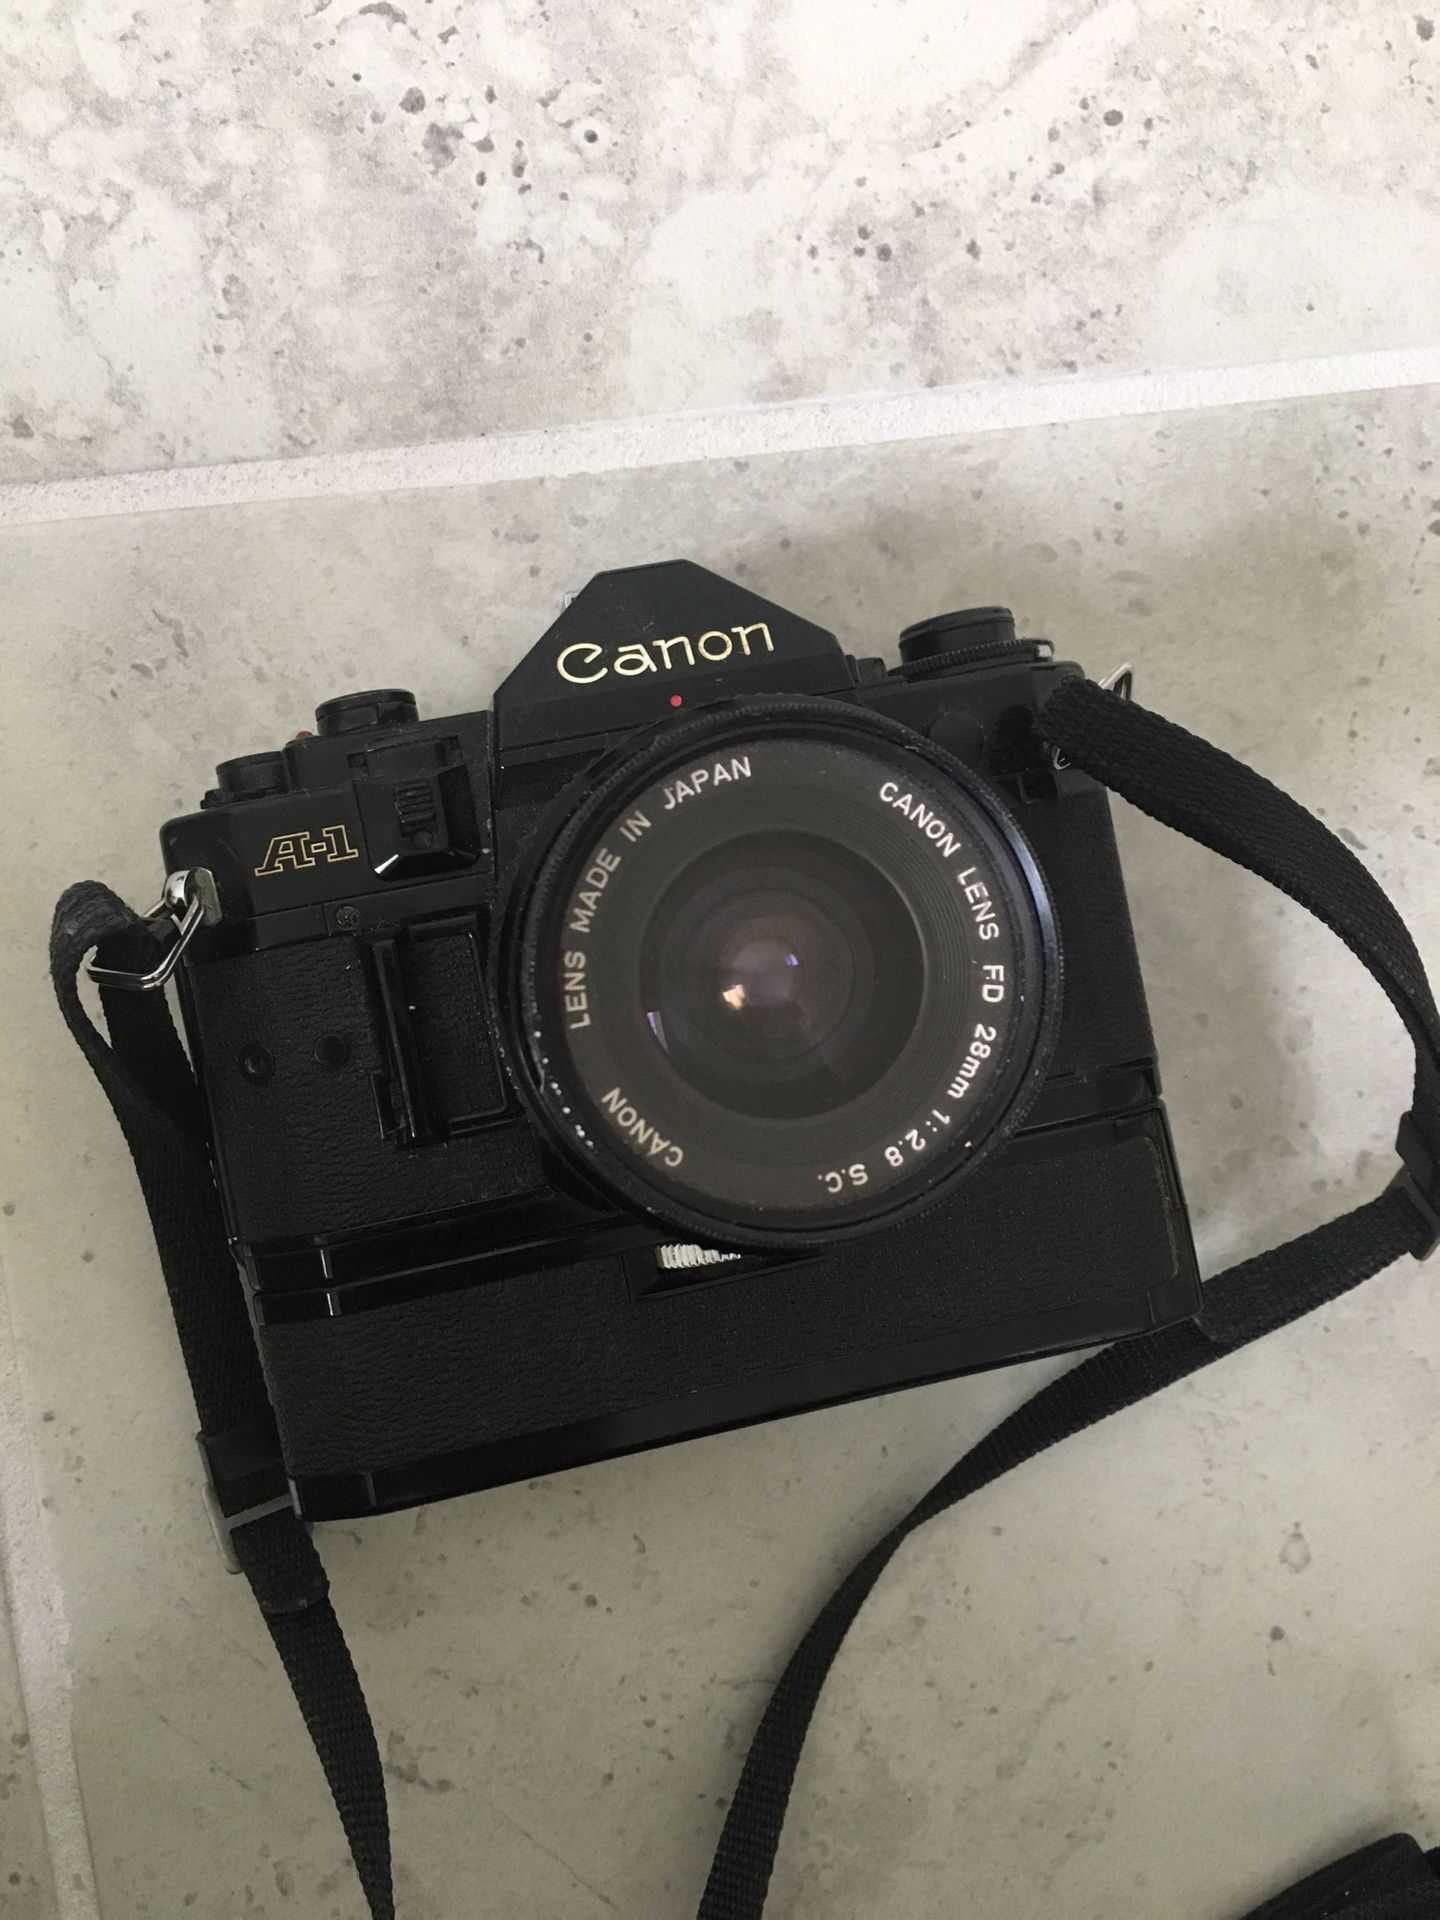 Vintage Canon A-1 Film camera with lenses